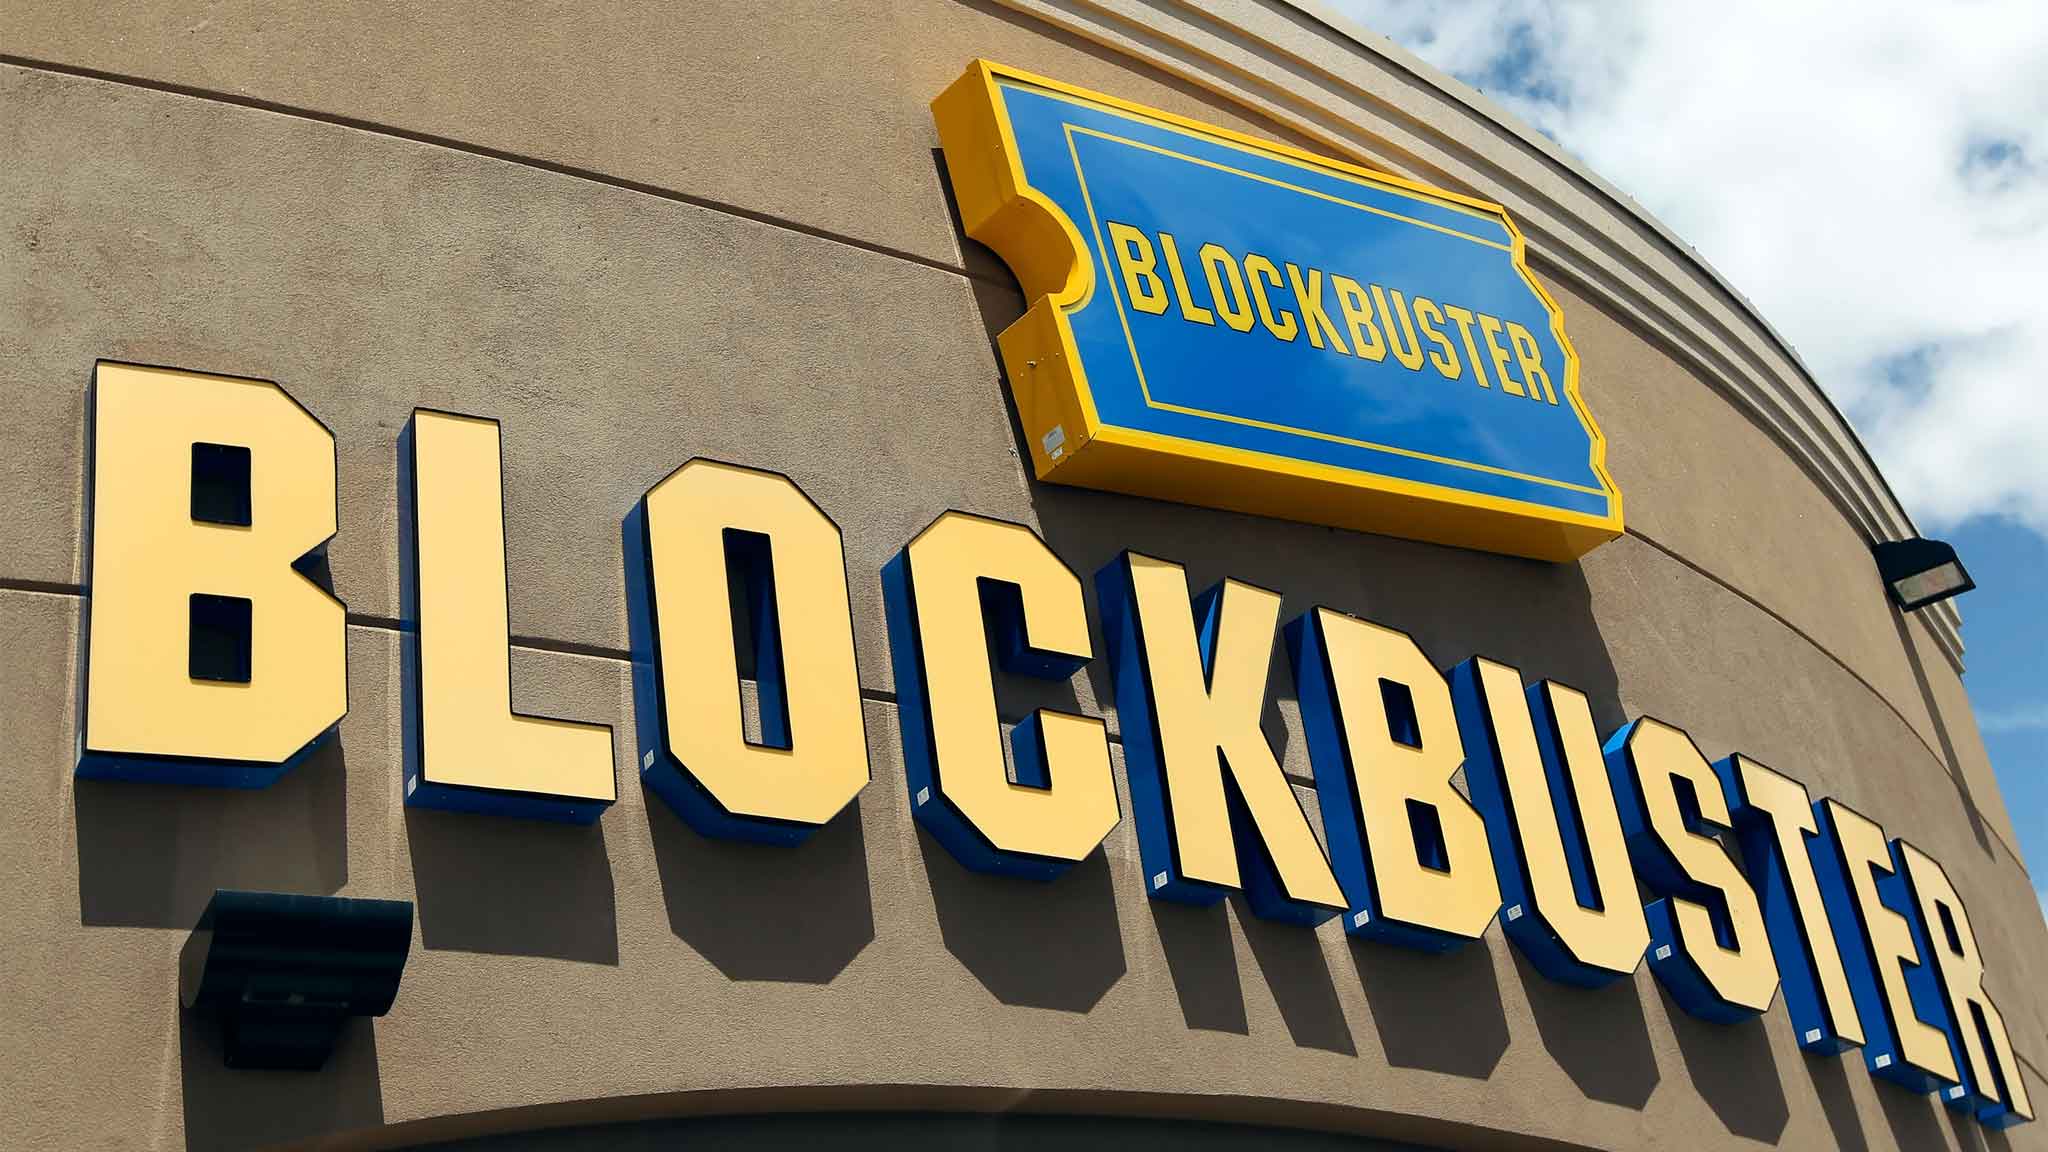 Blockbuster Company Logo - Blockbuster to close 129 outlets | Financial Times